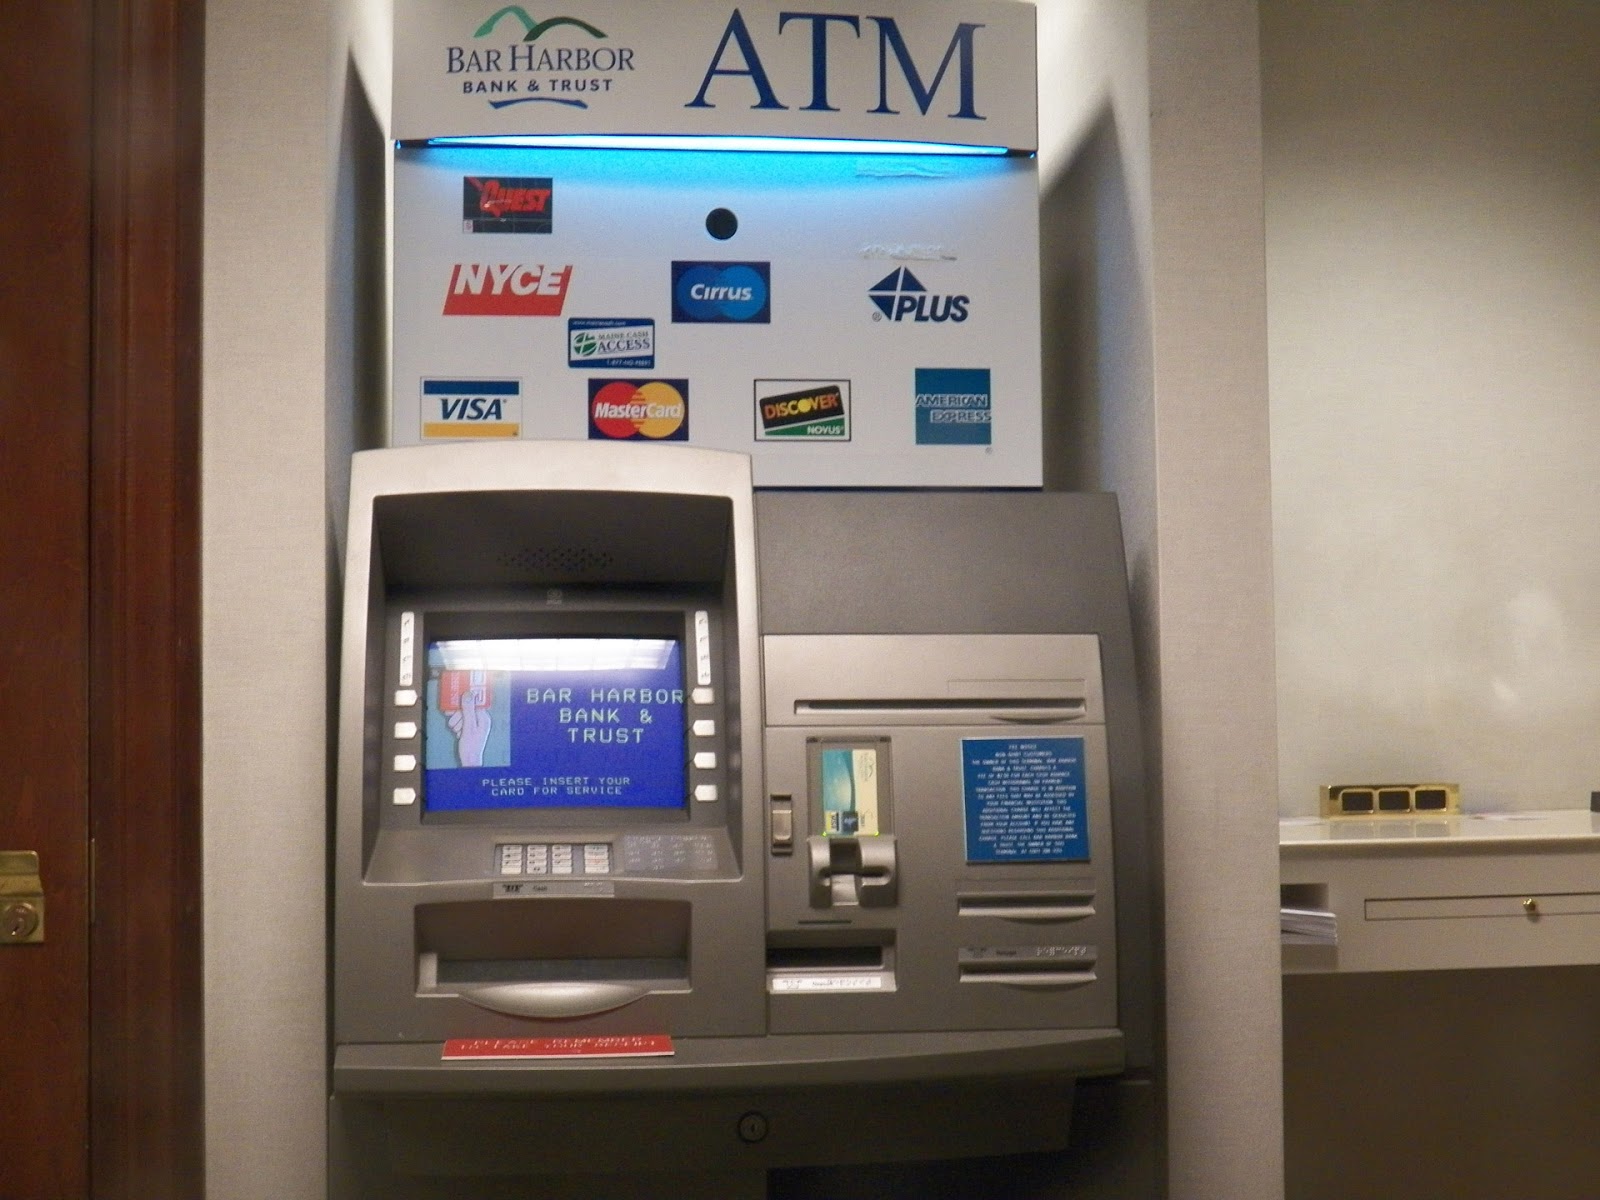 9roms-malware-is-making-atms-spit-cash